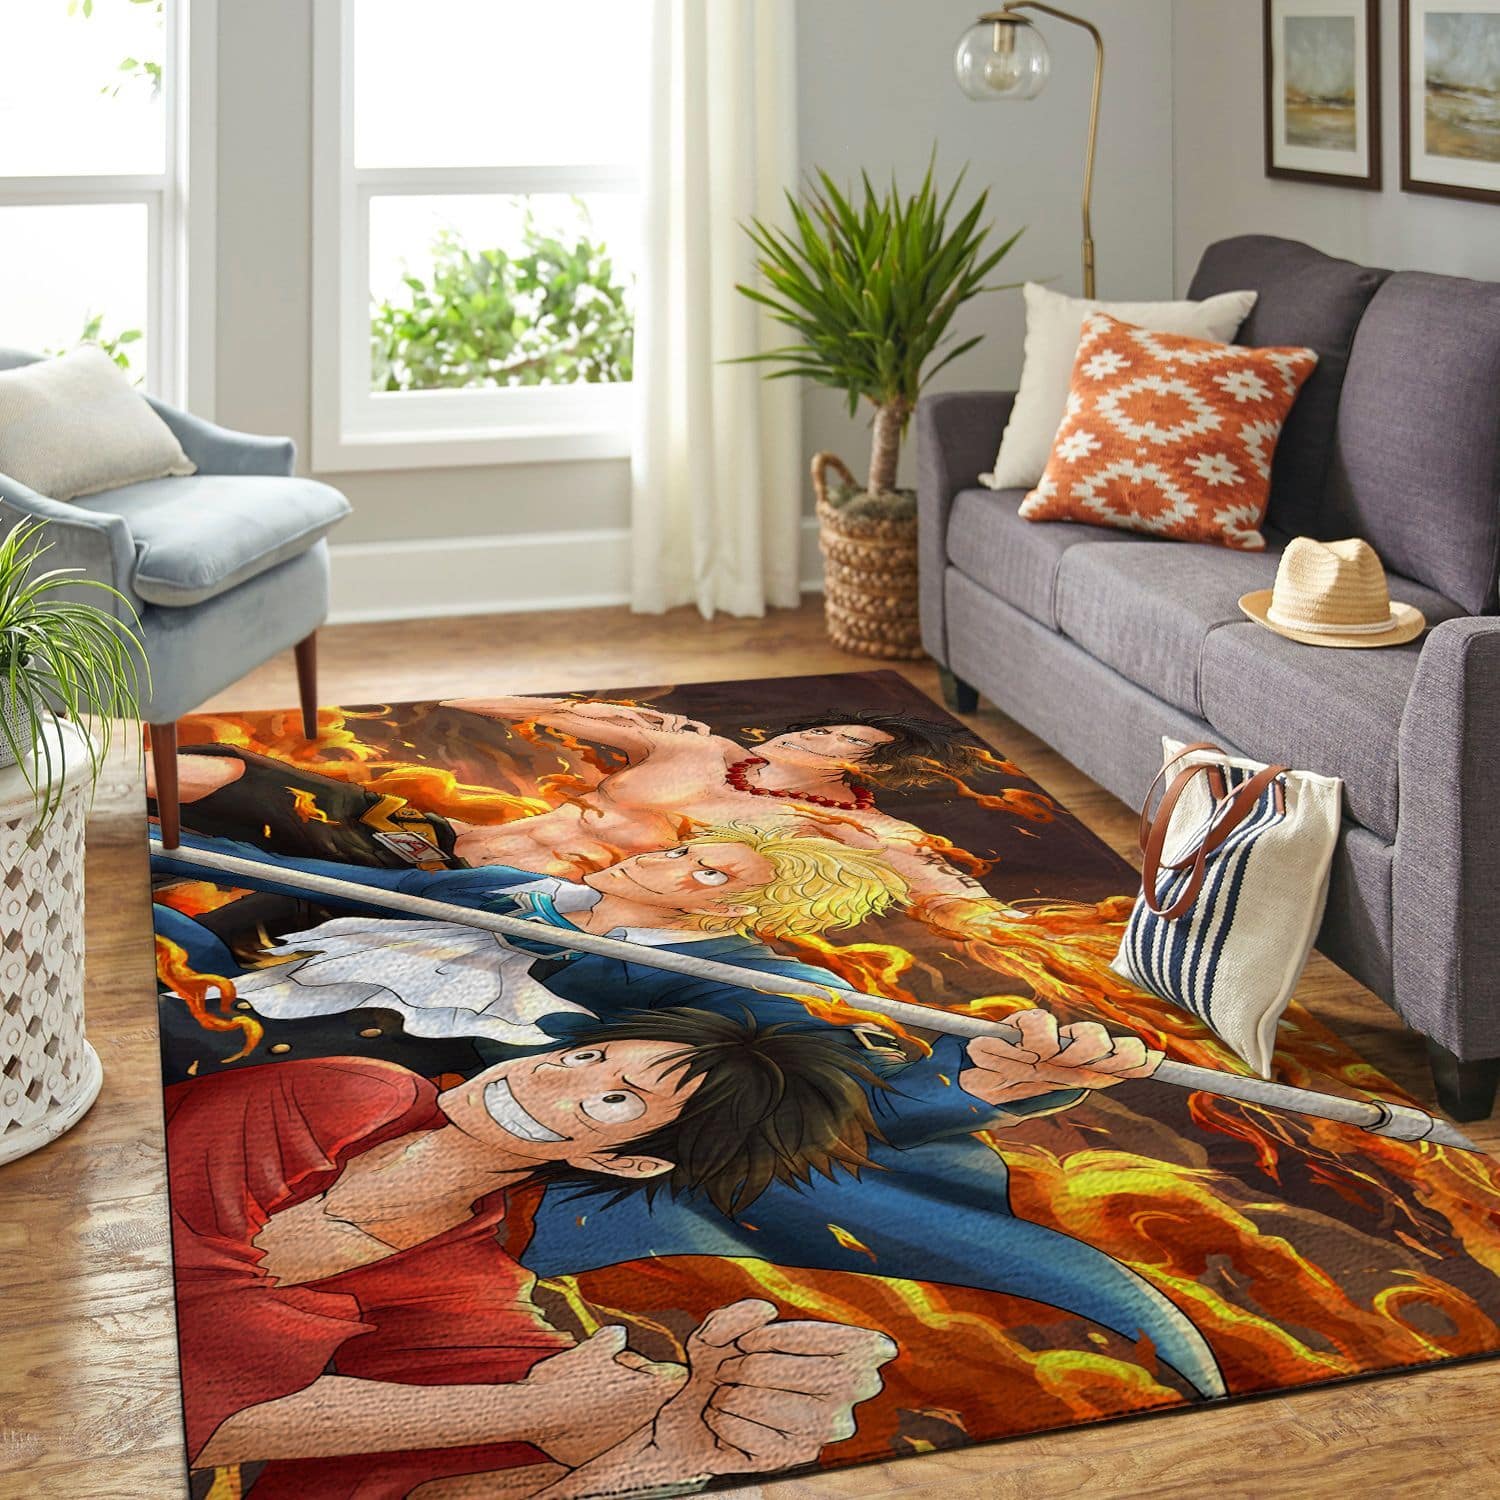 Amazon Onepiece-Luffy Living Room Area No6430 Rug